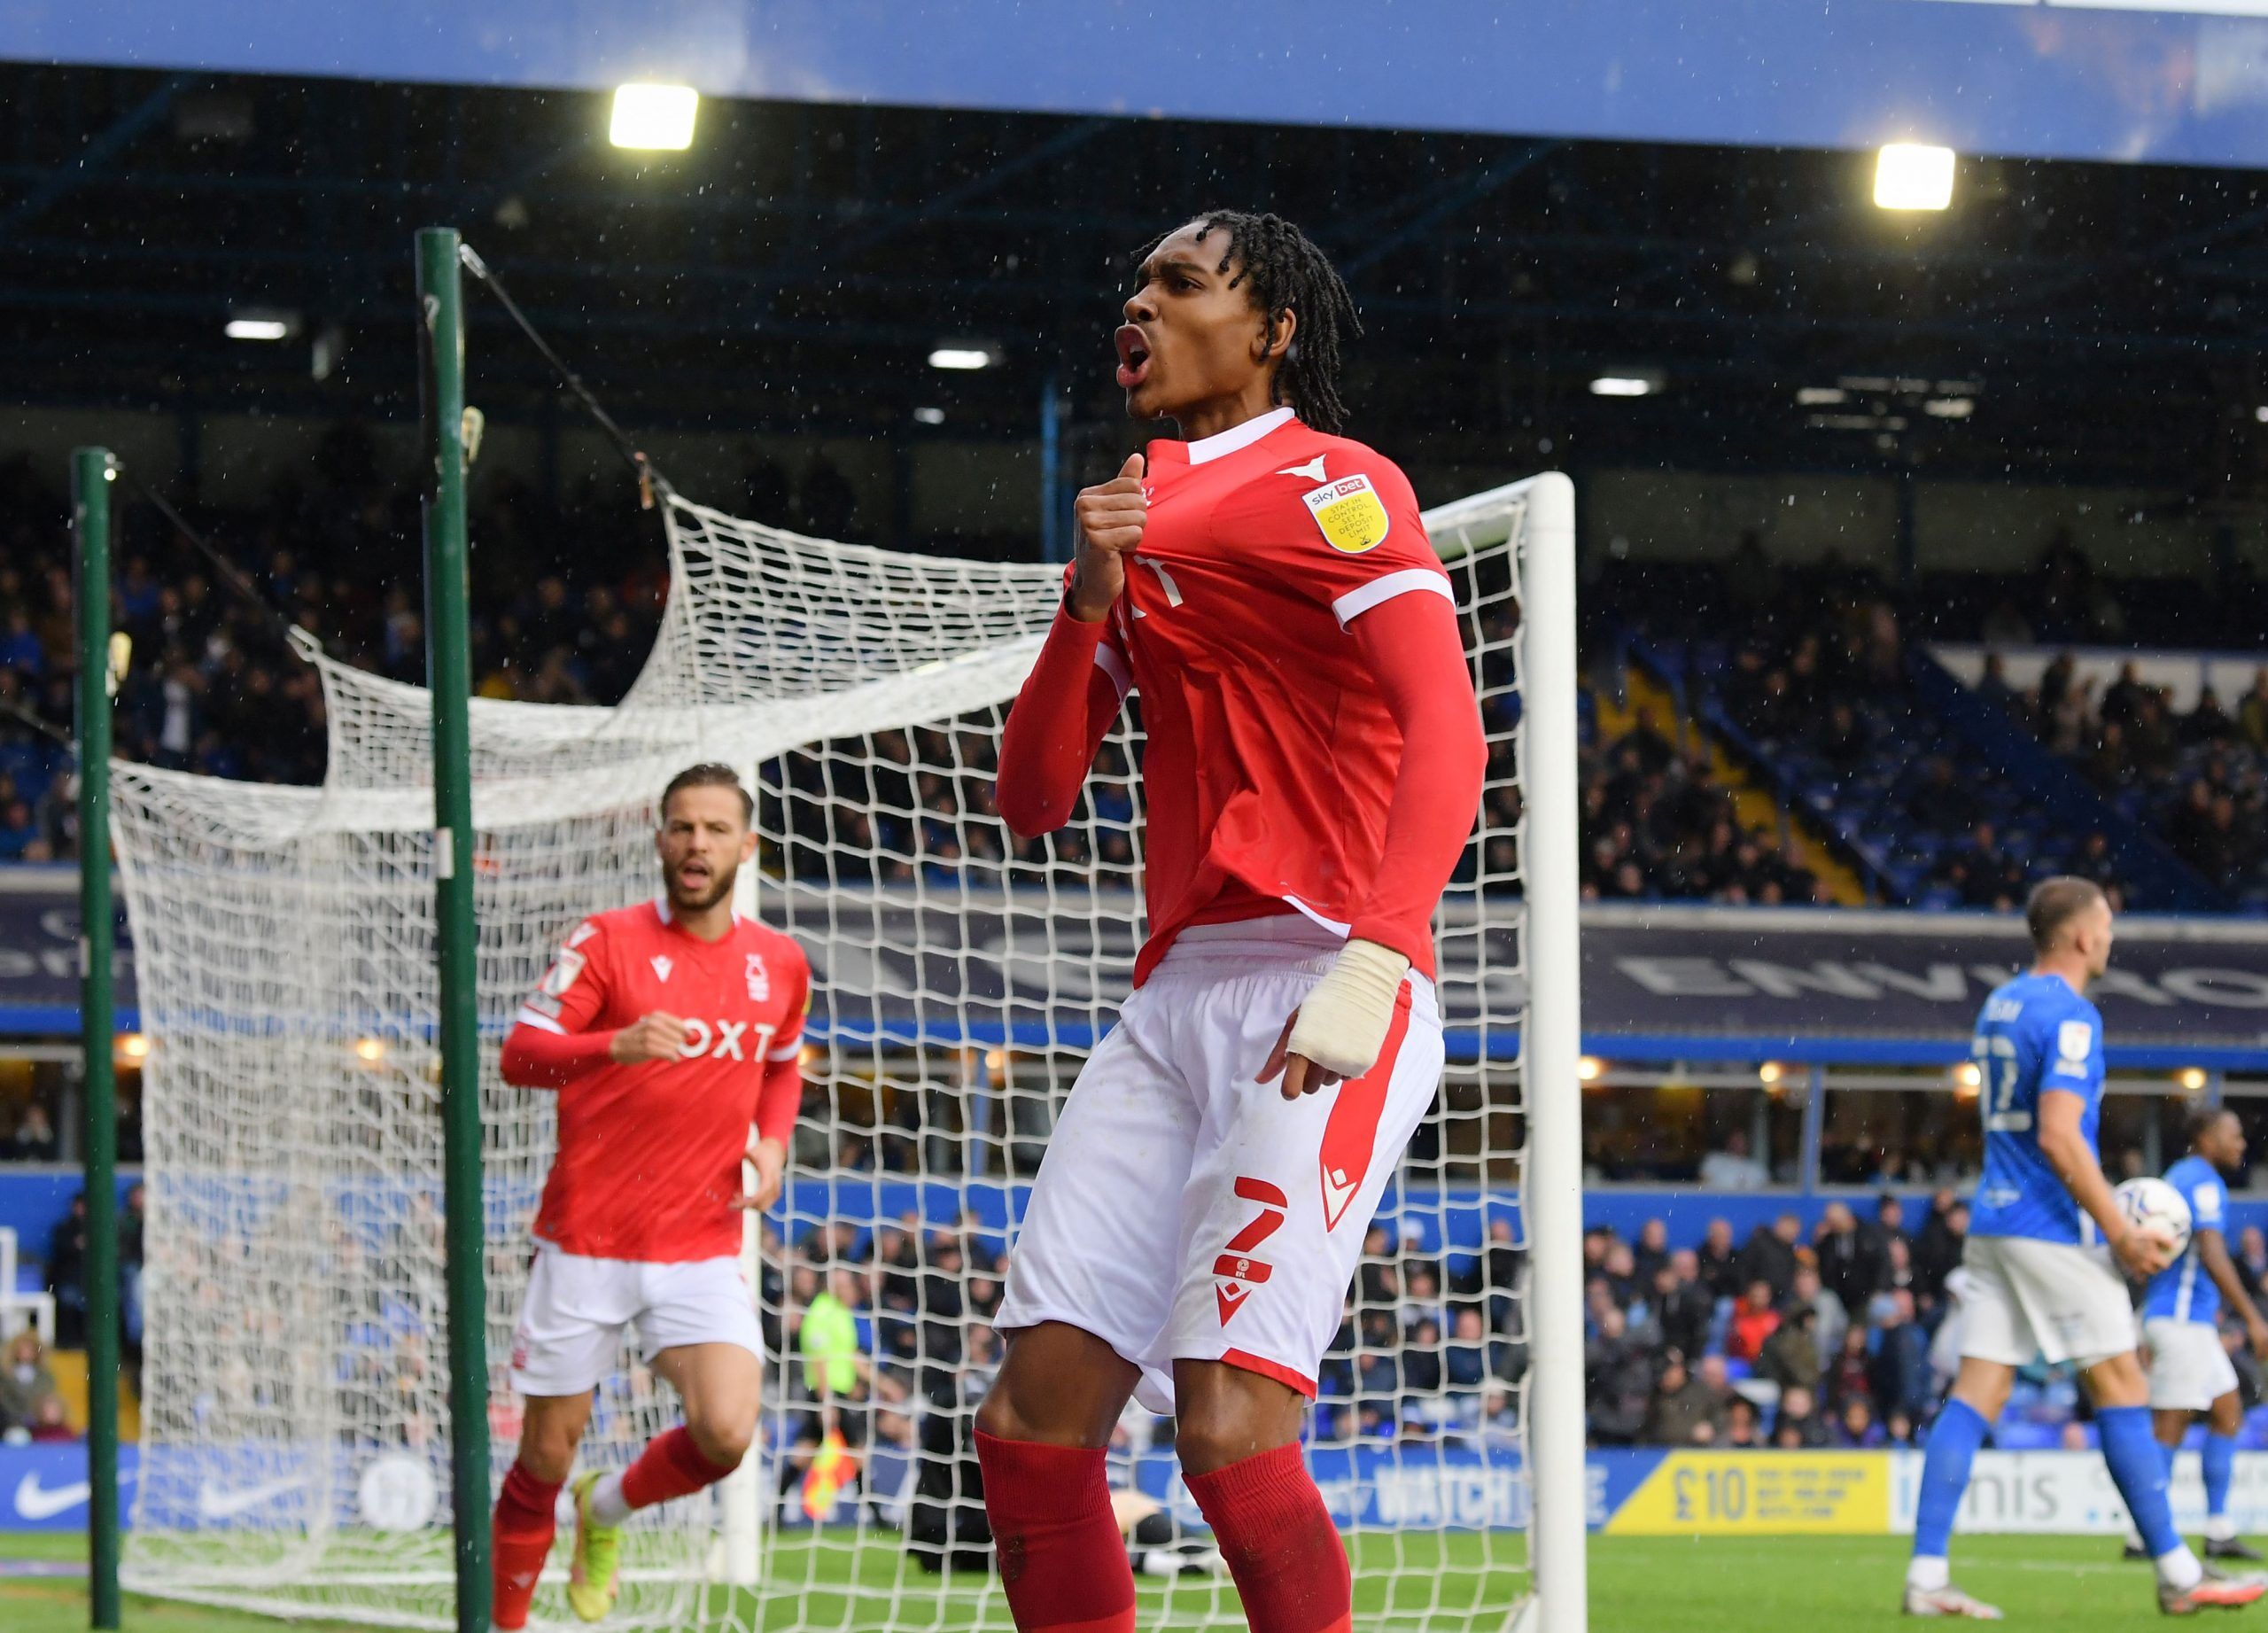 Soccer Football - Championship - Birmingham City v Nottingham Forest - St Andrew's, Birmingham, Britain - October 2, 2021  Nottingham Forest's Djed Spence celebrates scoring their third goal  Action Images/Paul Burrows  EDITORIAL USE ONLY. No use with unauthorized audio, video, data, fixture lists, club/league logos or 